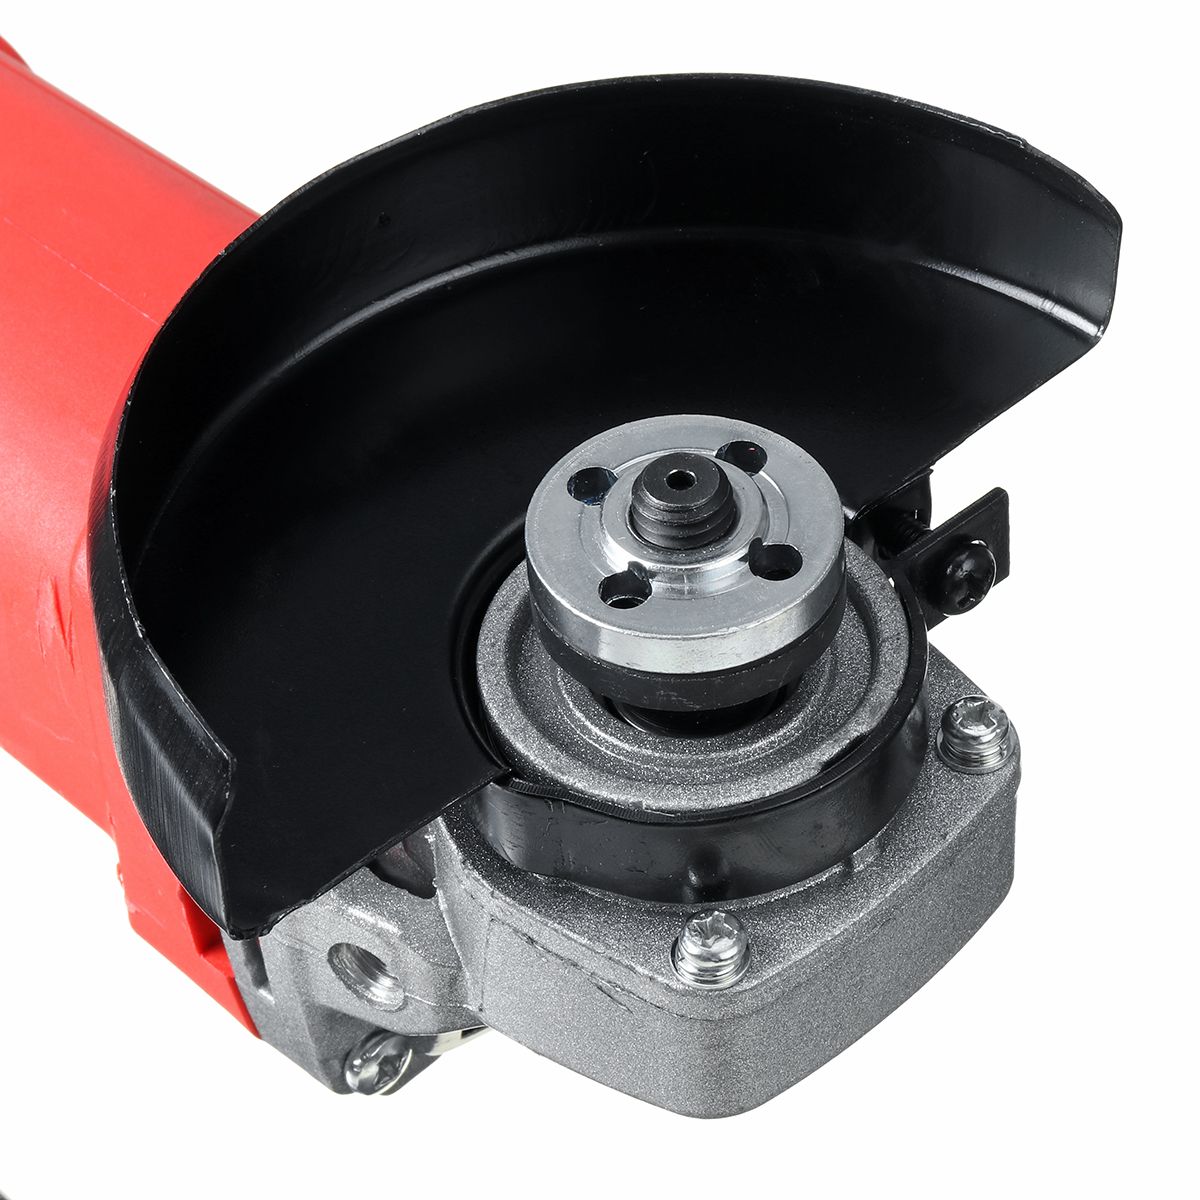 1500W-Angle-Grinder-With-100mm-Grinding-Disc-4-Electric-Corded-Sander-Cutter-1628131